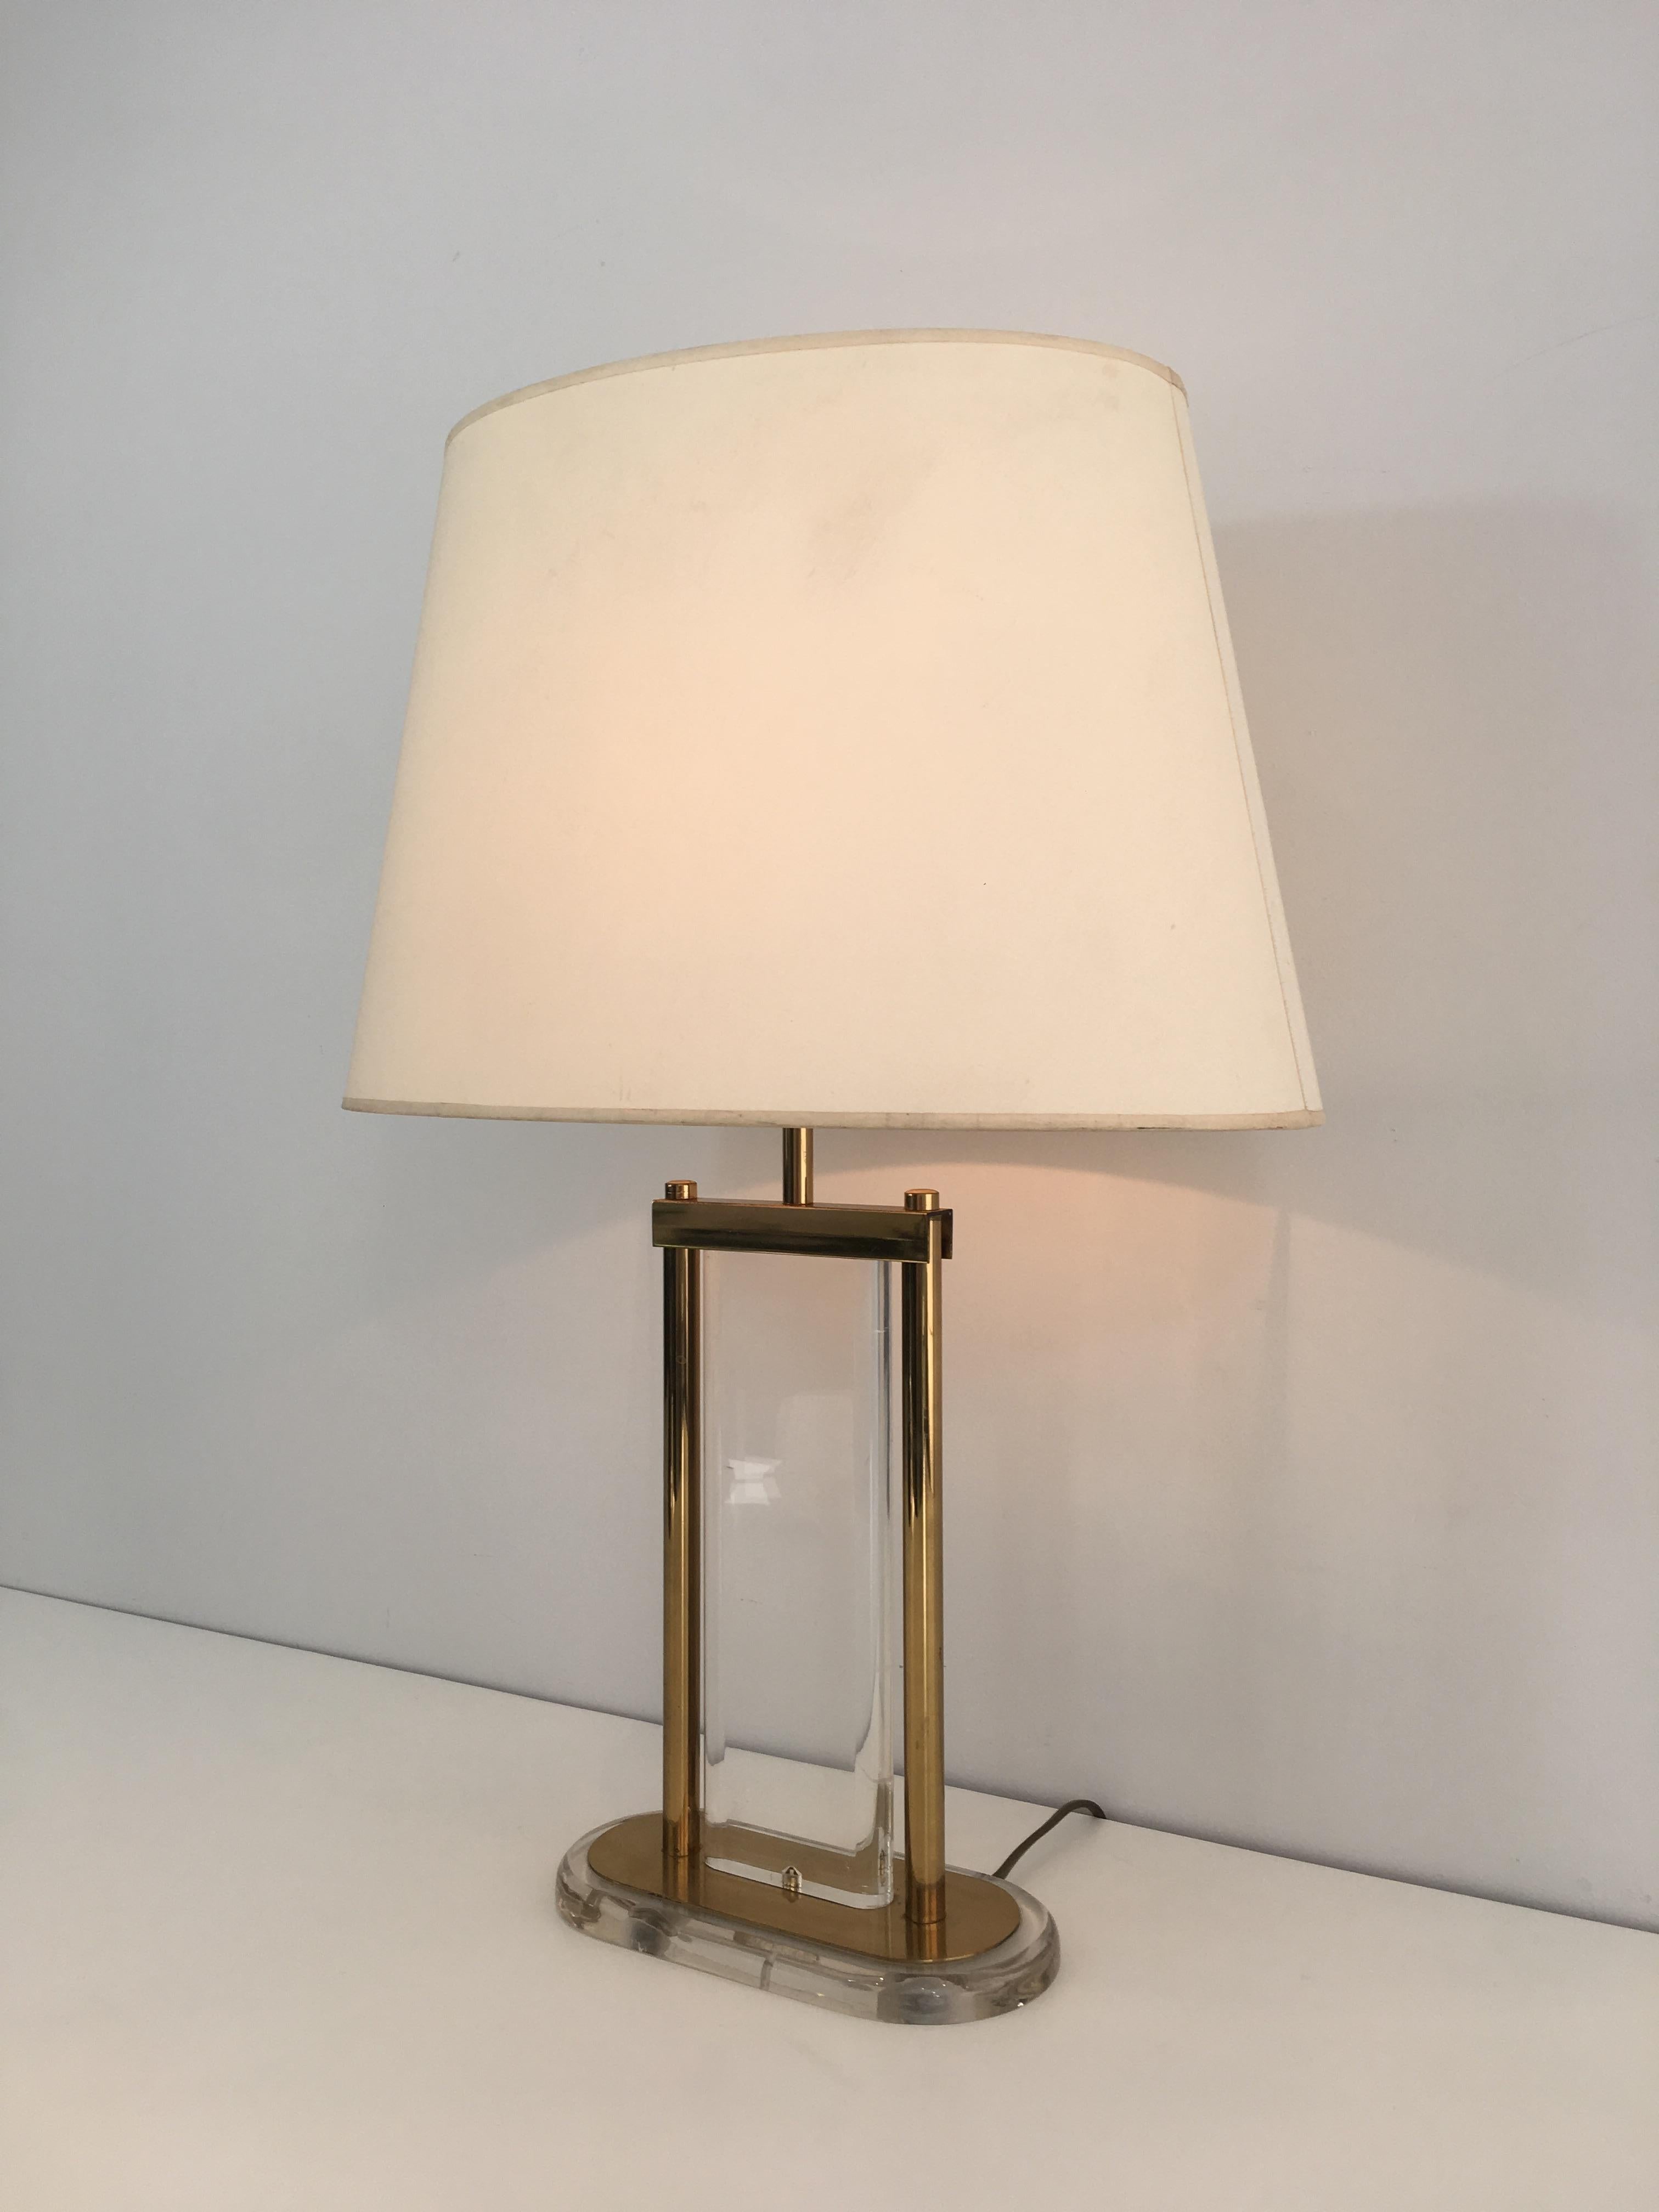 Mid-Century Modern Gilt Brass and Lucite Table Lamp, French, circa 1970